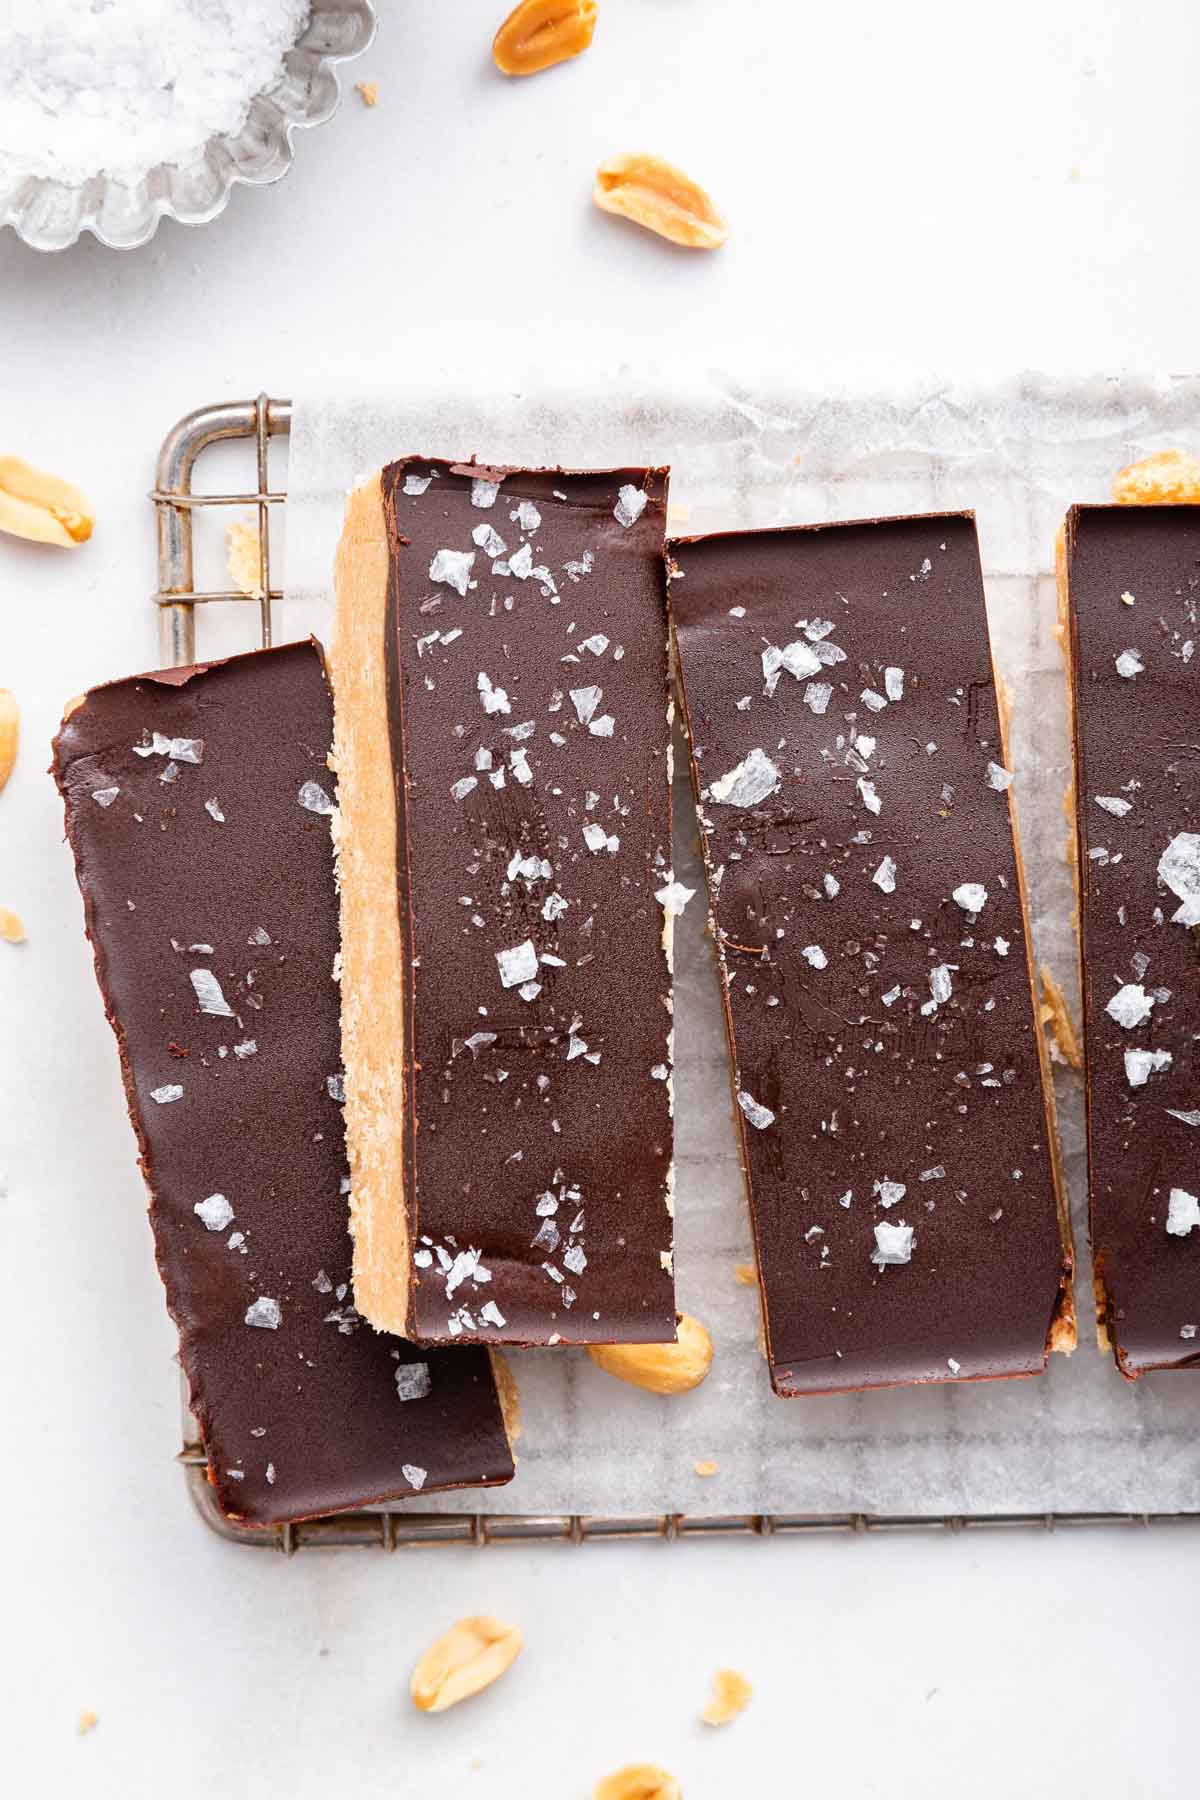 Overhead shot of long chocolate bars with peanut butter filling.